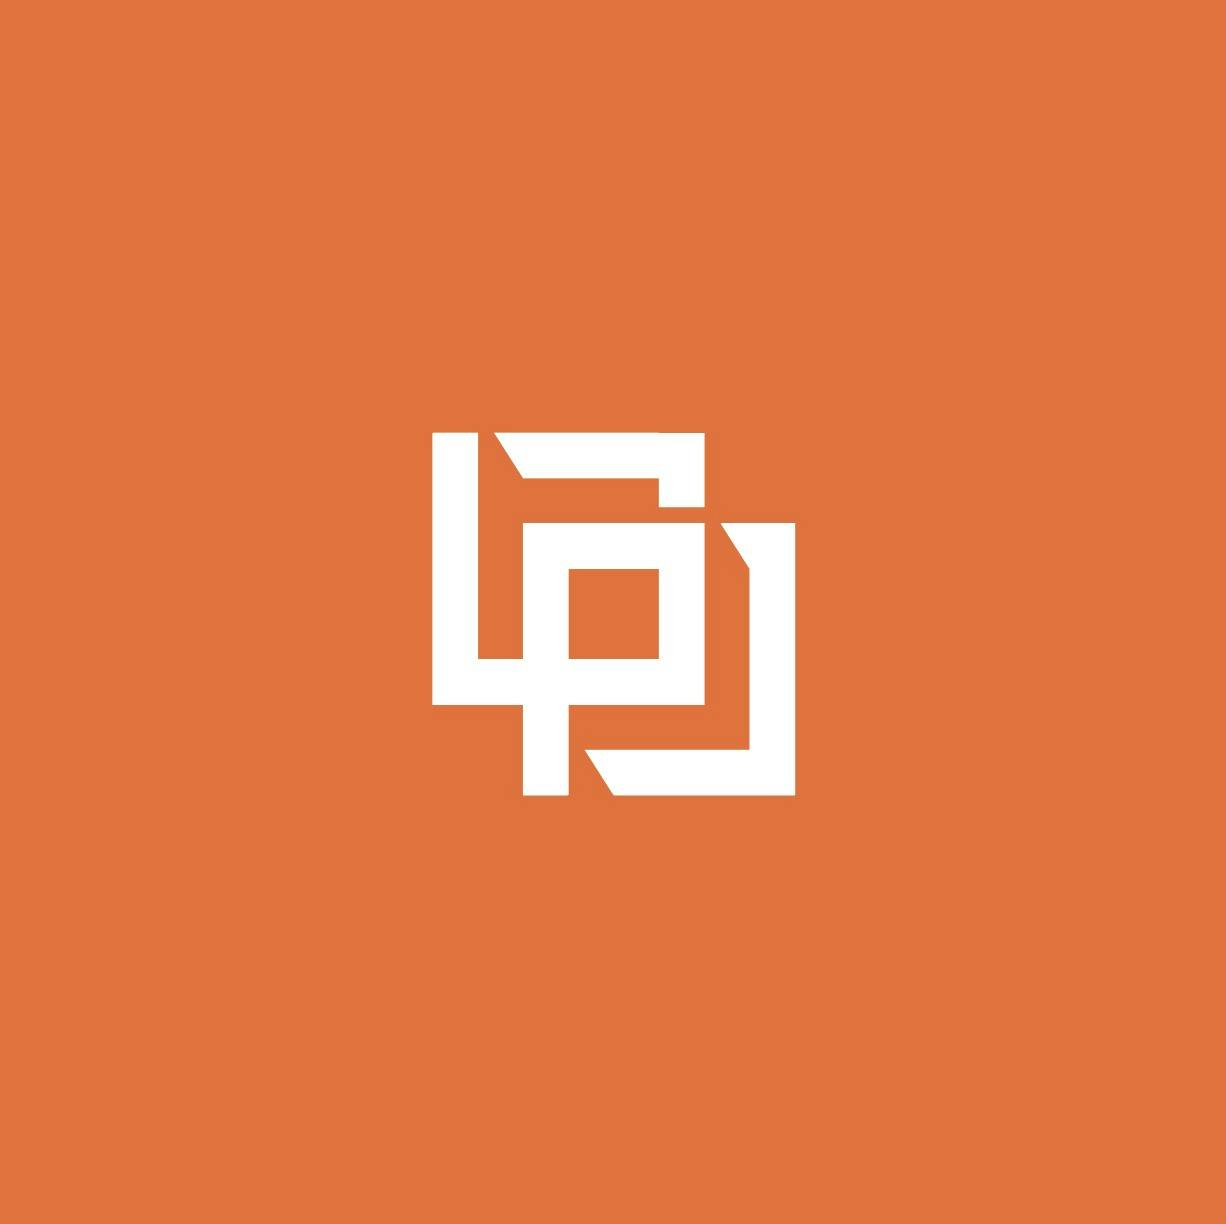 Solid Orange background with an icon of a L and P.